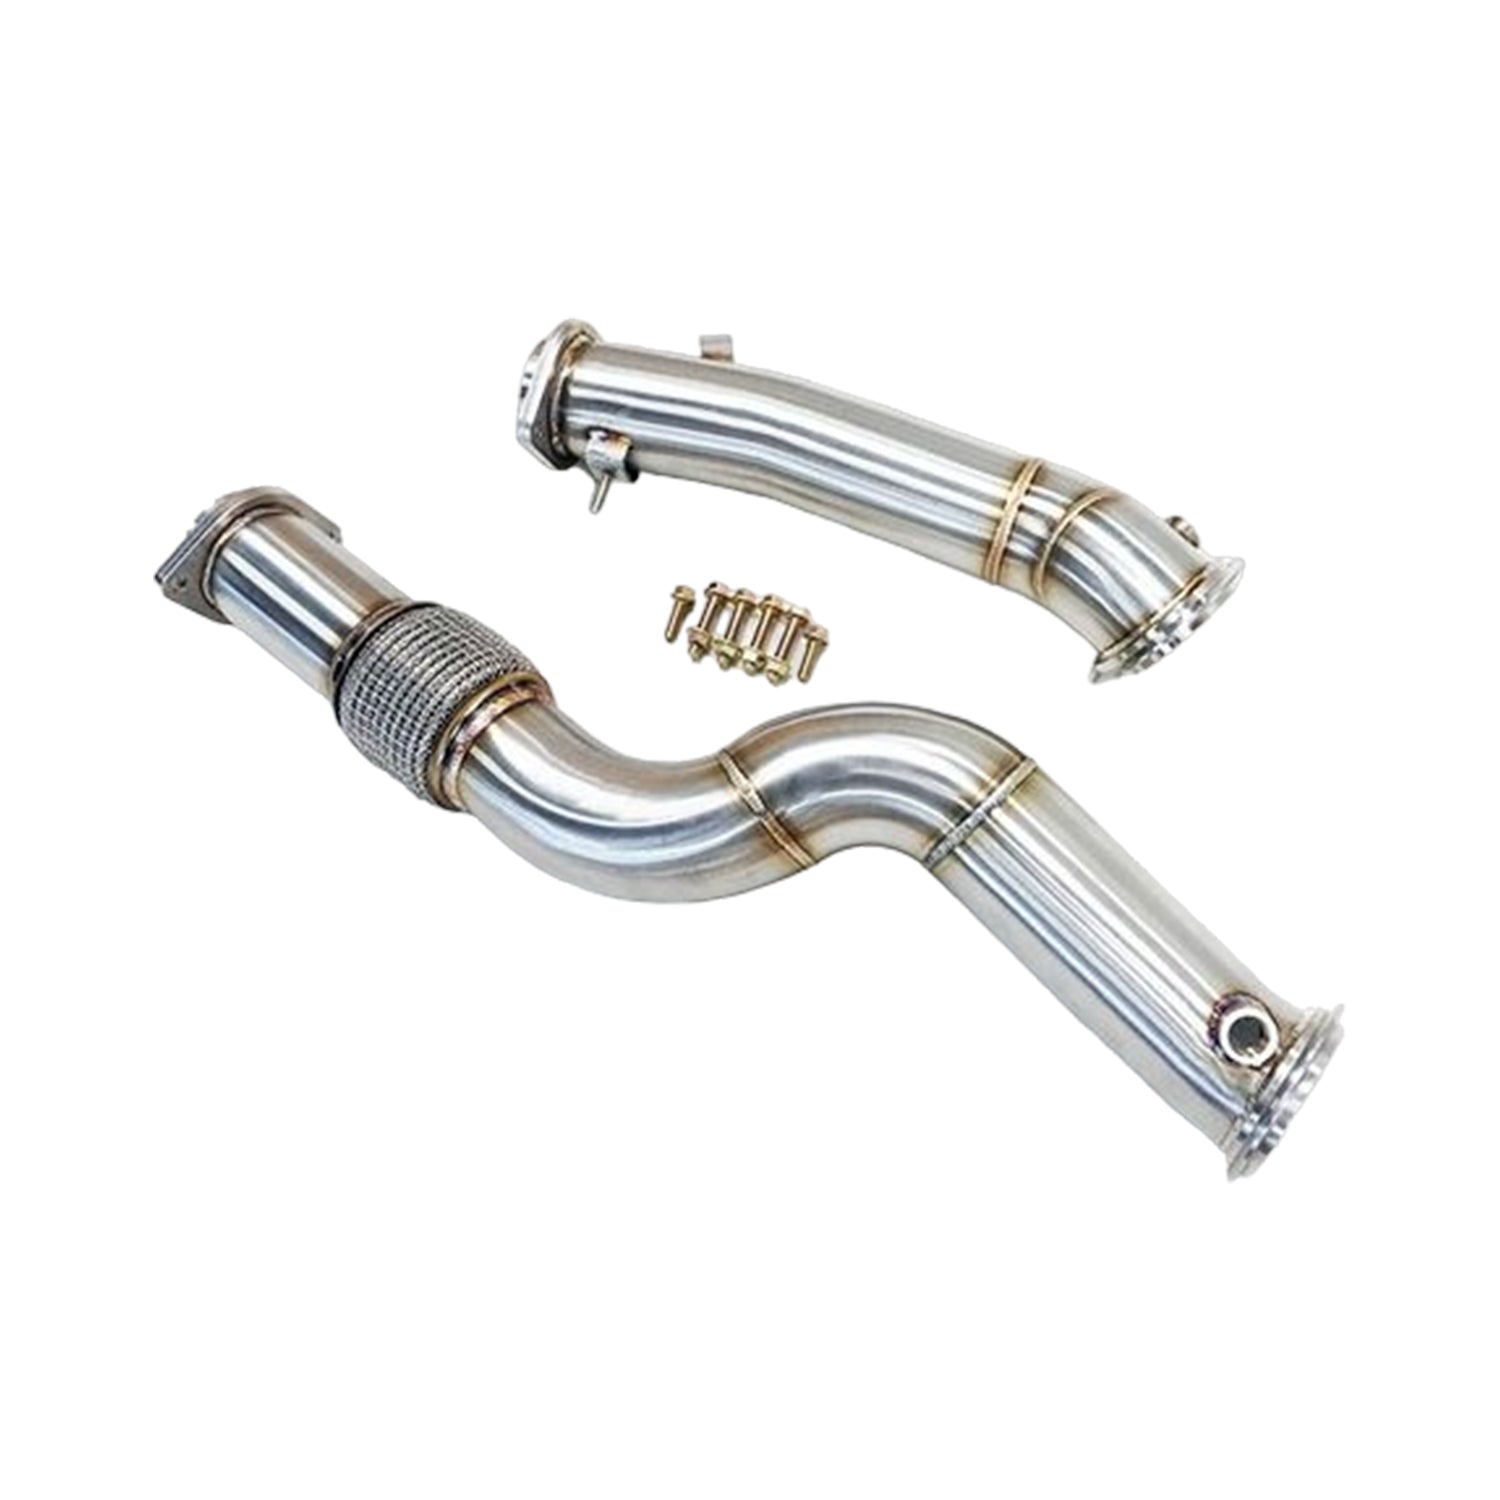 BMW S58 Decat Downpipes - G80 G81 M3, G82 G83 M4 & G87 M2